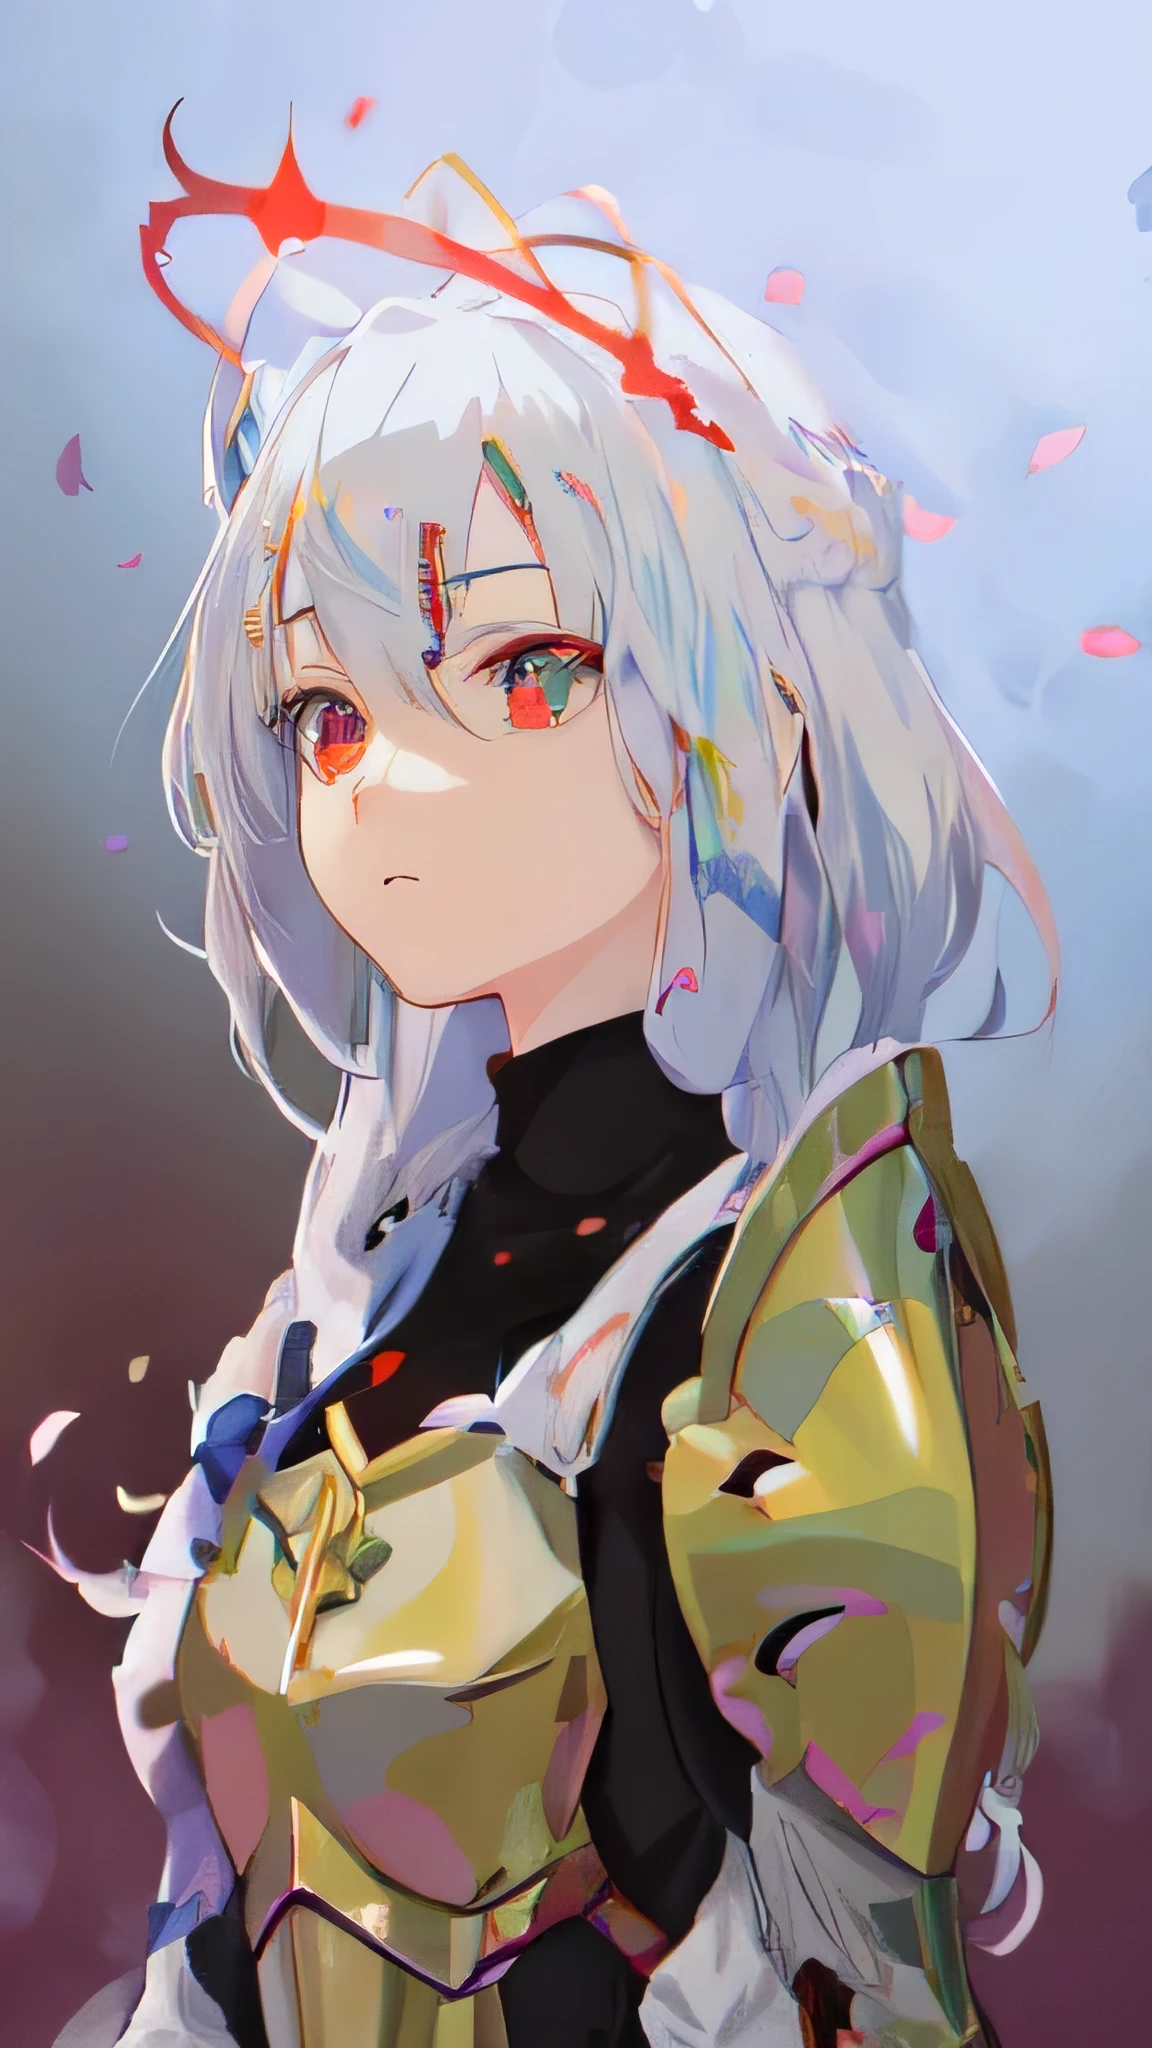 anime girl with white hair and armor holding a sword, portrait knights of zodiac girl, white haired deity, red halo around her head,armor girl, made with anime painter studio, knights of zodiac girl, inspired by Li Chevalier, anime style like faay night, anime artstyle, detailed fanart, flat anime style shading, high quality anime artstyle, white haired, vector shaded anime